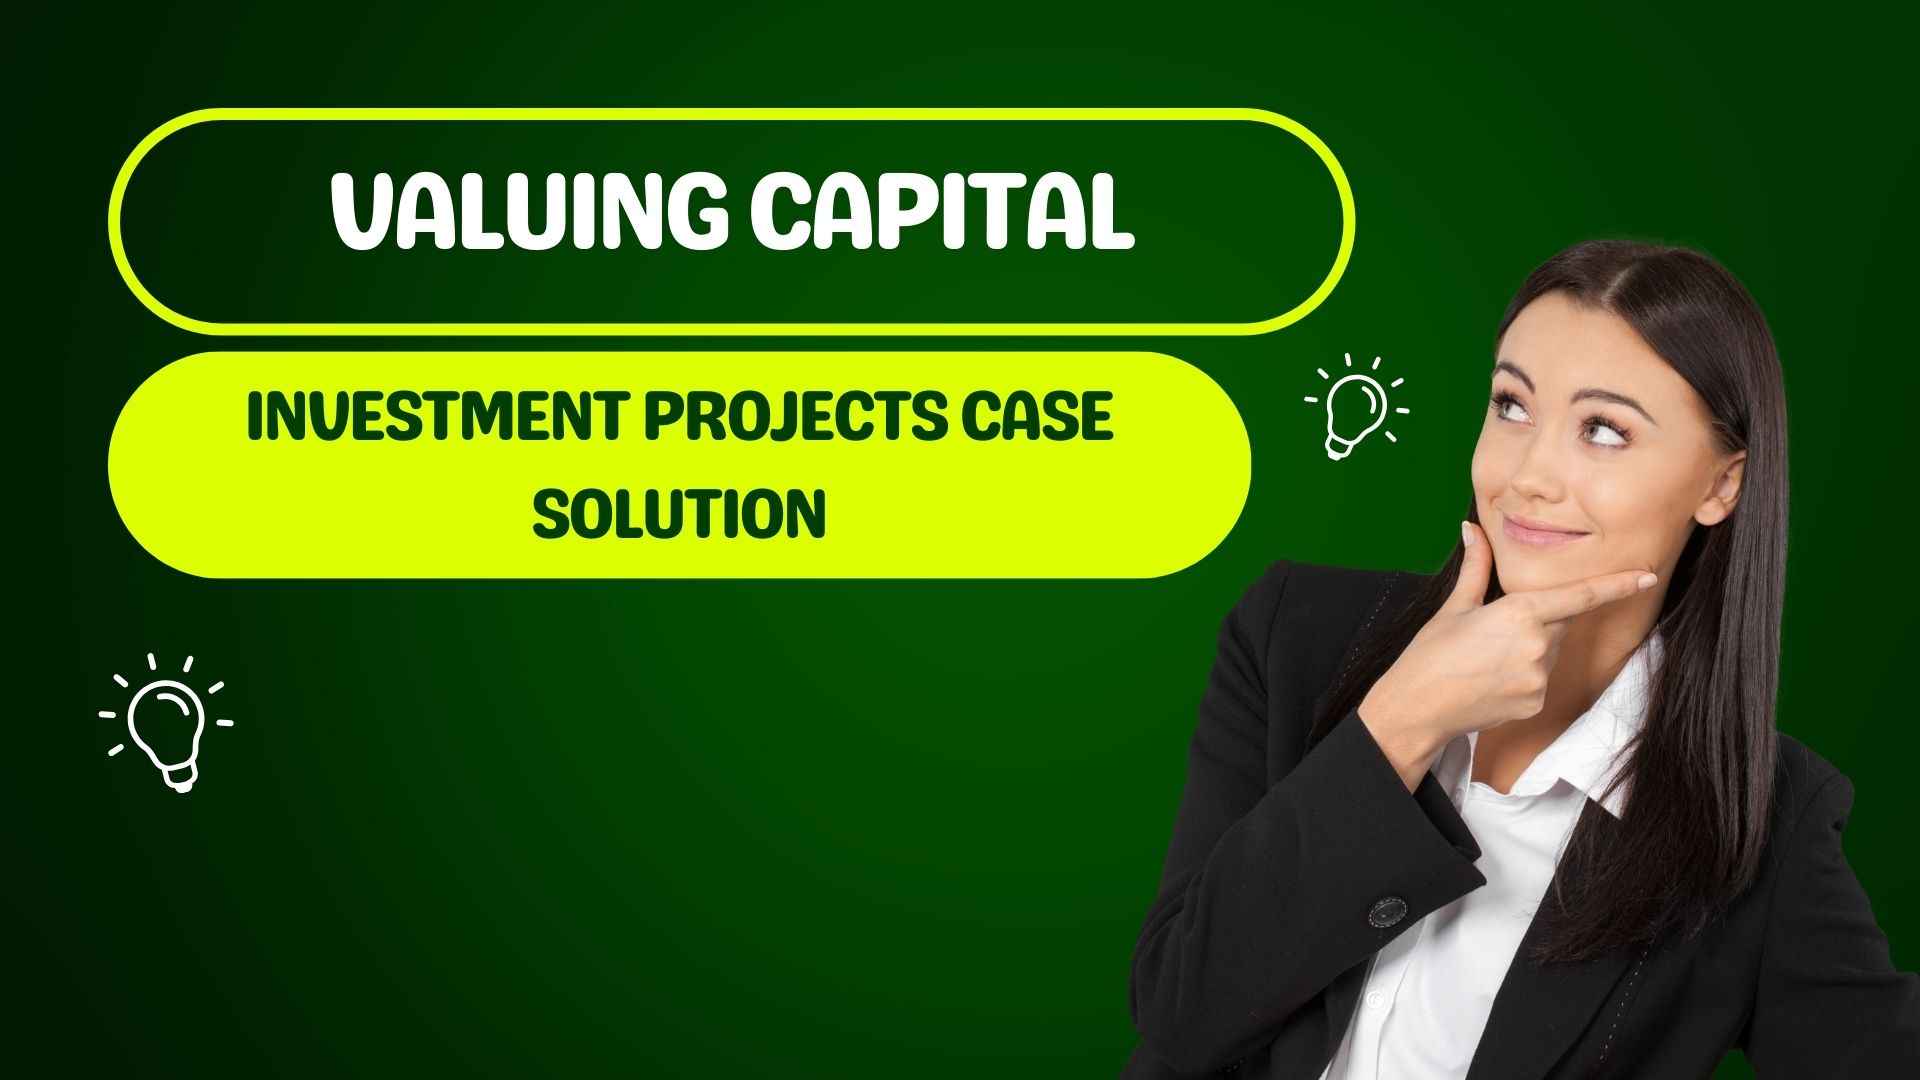 Valuing Capital Investment Projects Case Solution